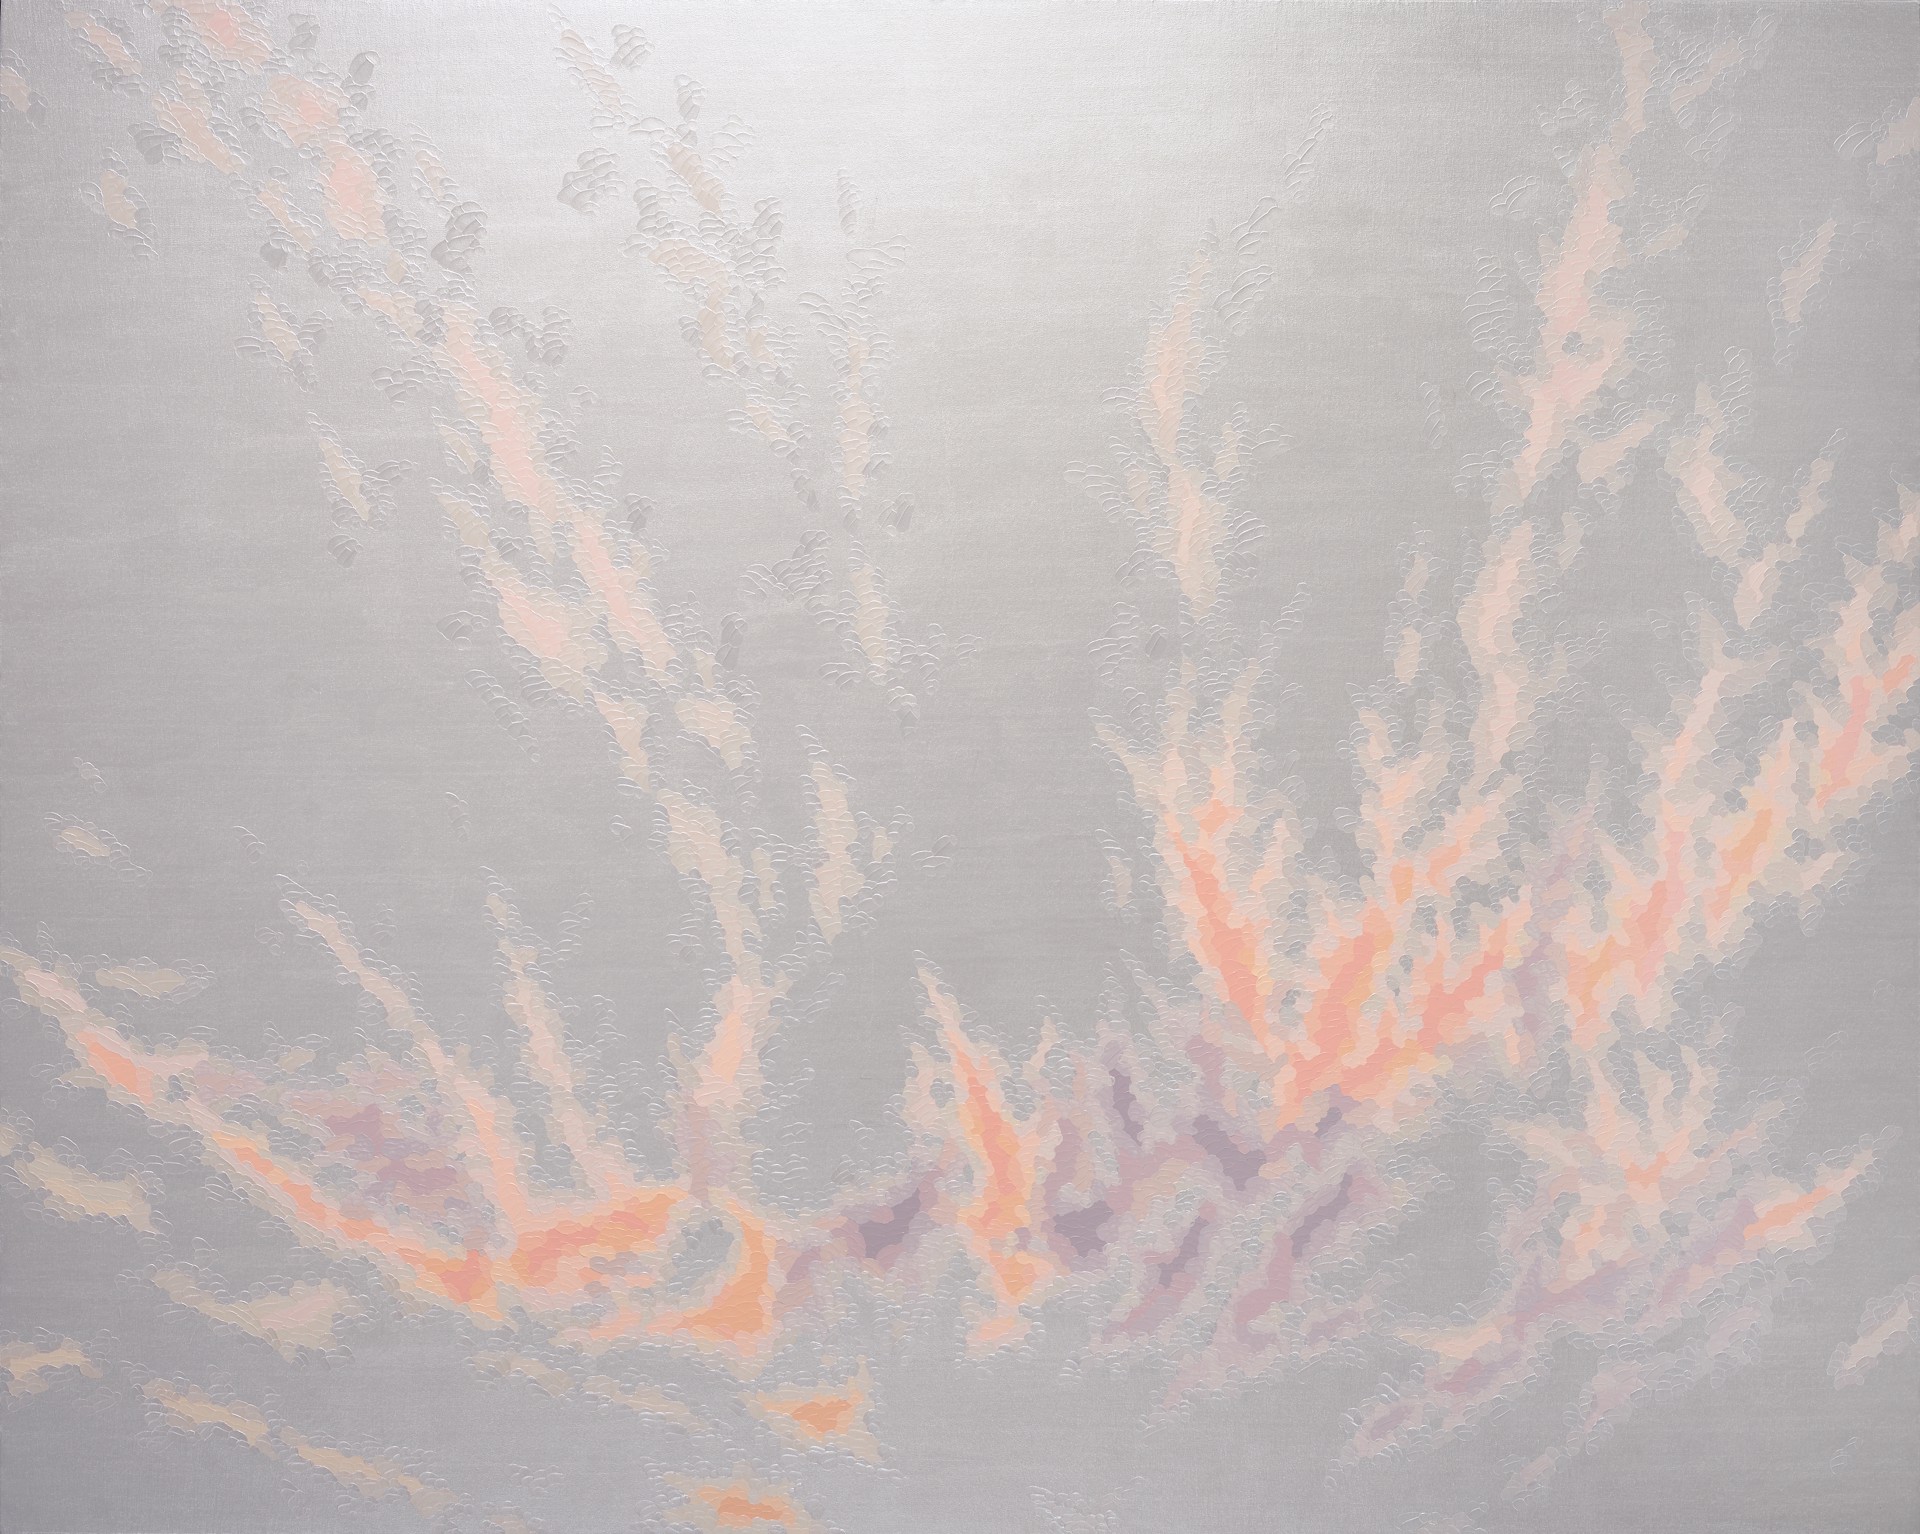 Into a Coral Sky (pearl) by Elaine Coombs